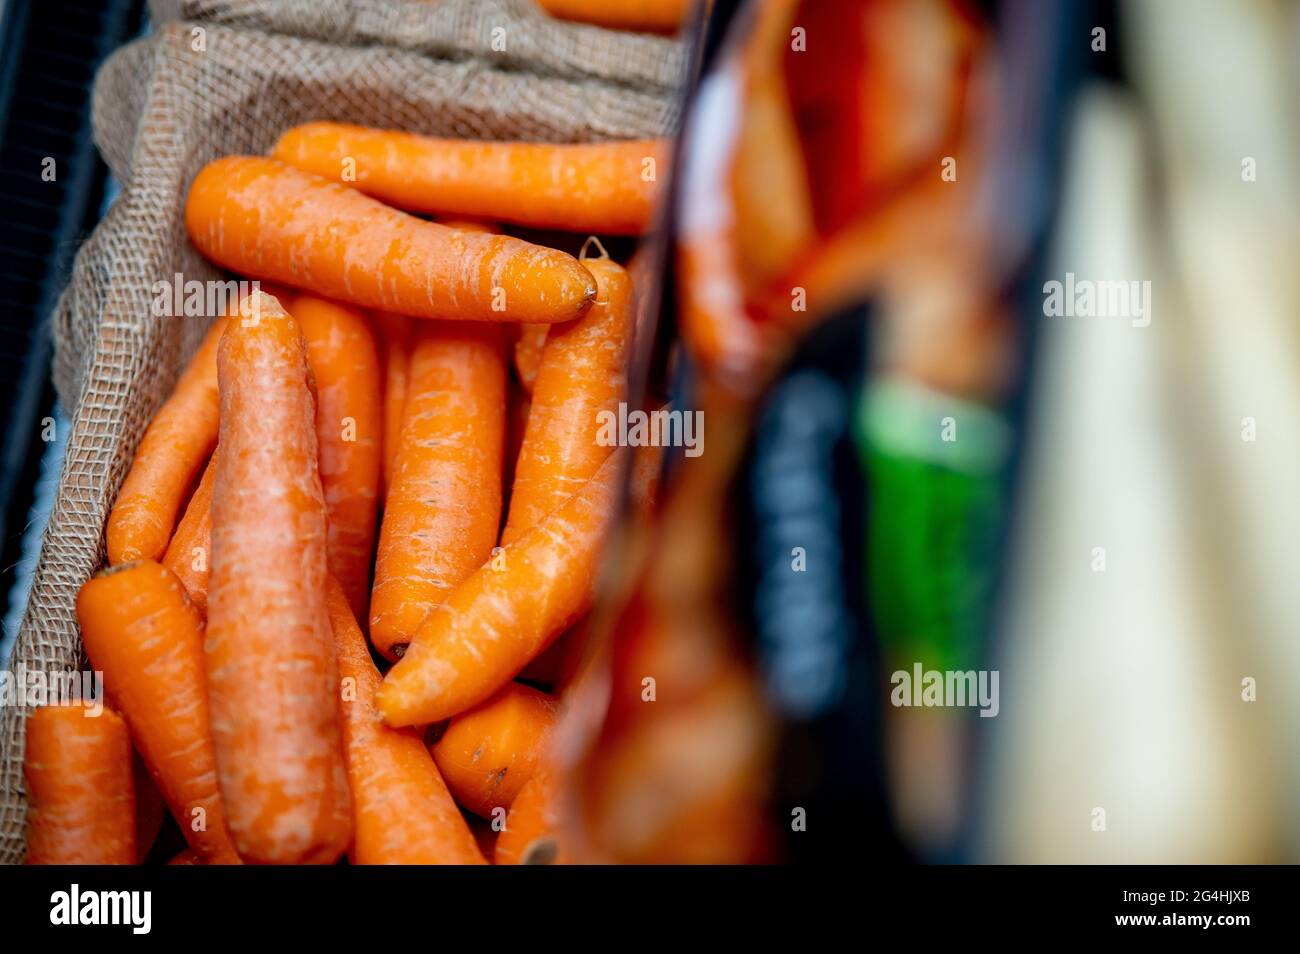 Carrots on sale at a supermarket. Stock Photo